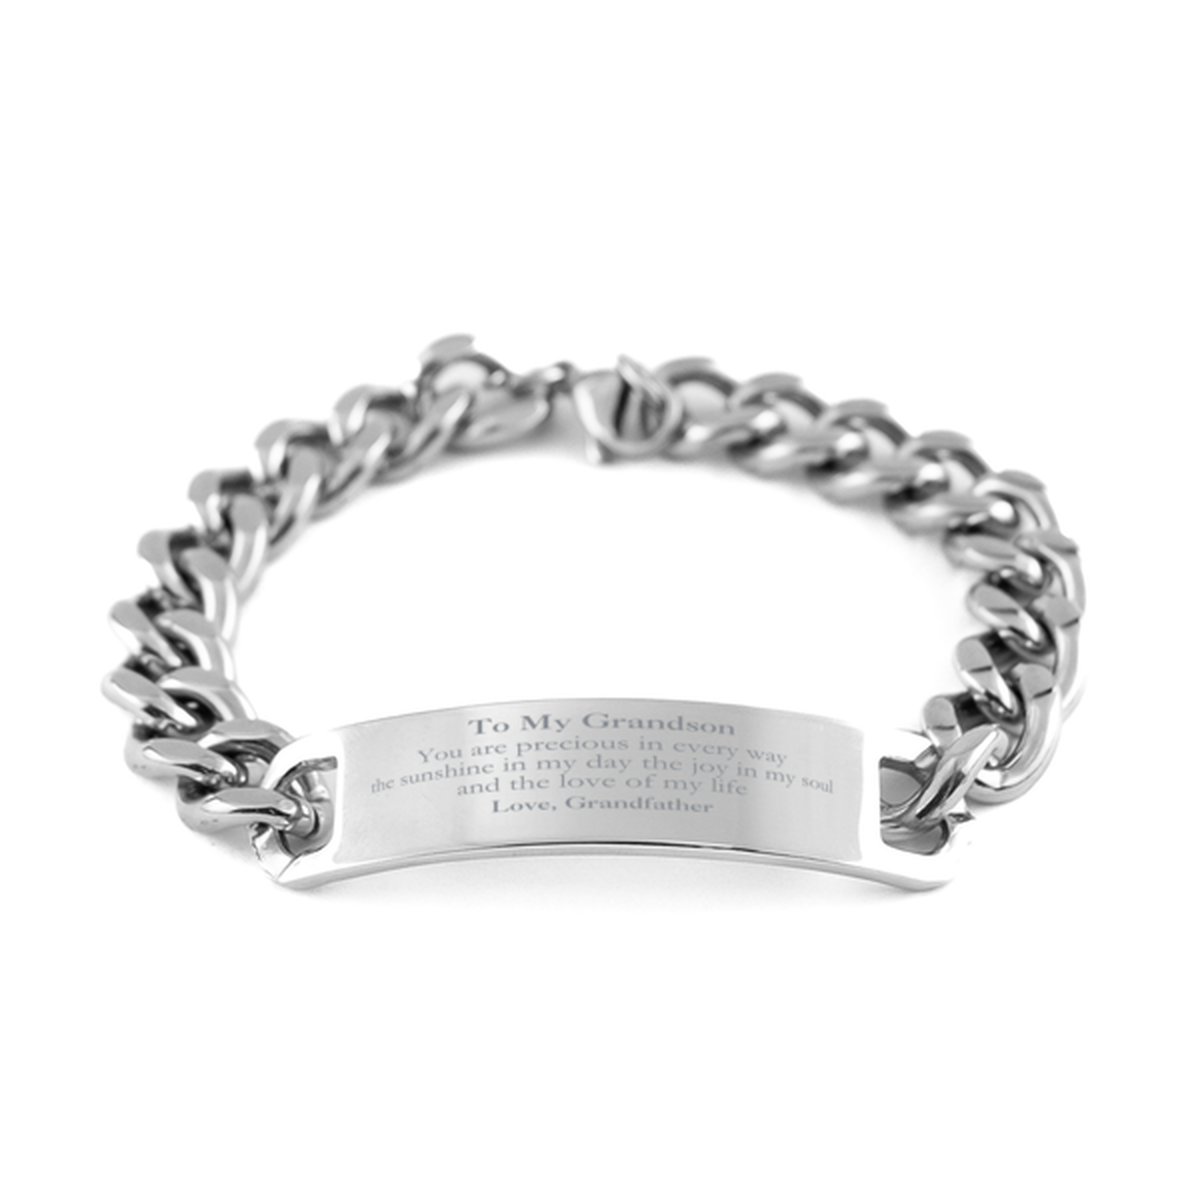 Graduation Gifts for Grandson Cuban Chain Stainless Steel Bracelet Present from Grandfather, Christmas Grandson Birthday Gifts Grandson You are precious in every way the sunshine in my day. Love, Grandfather